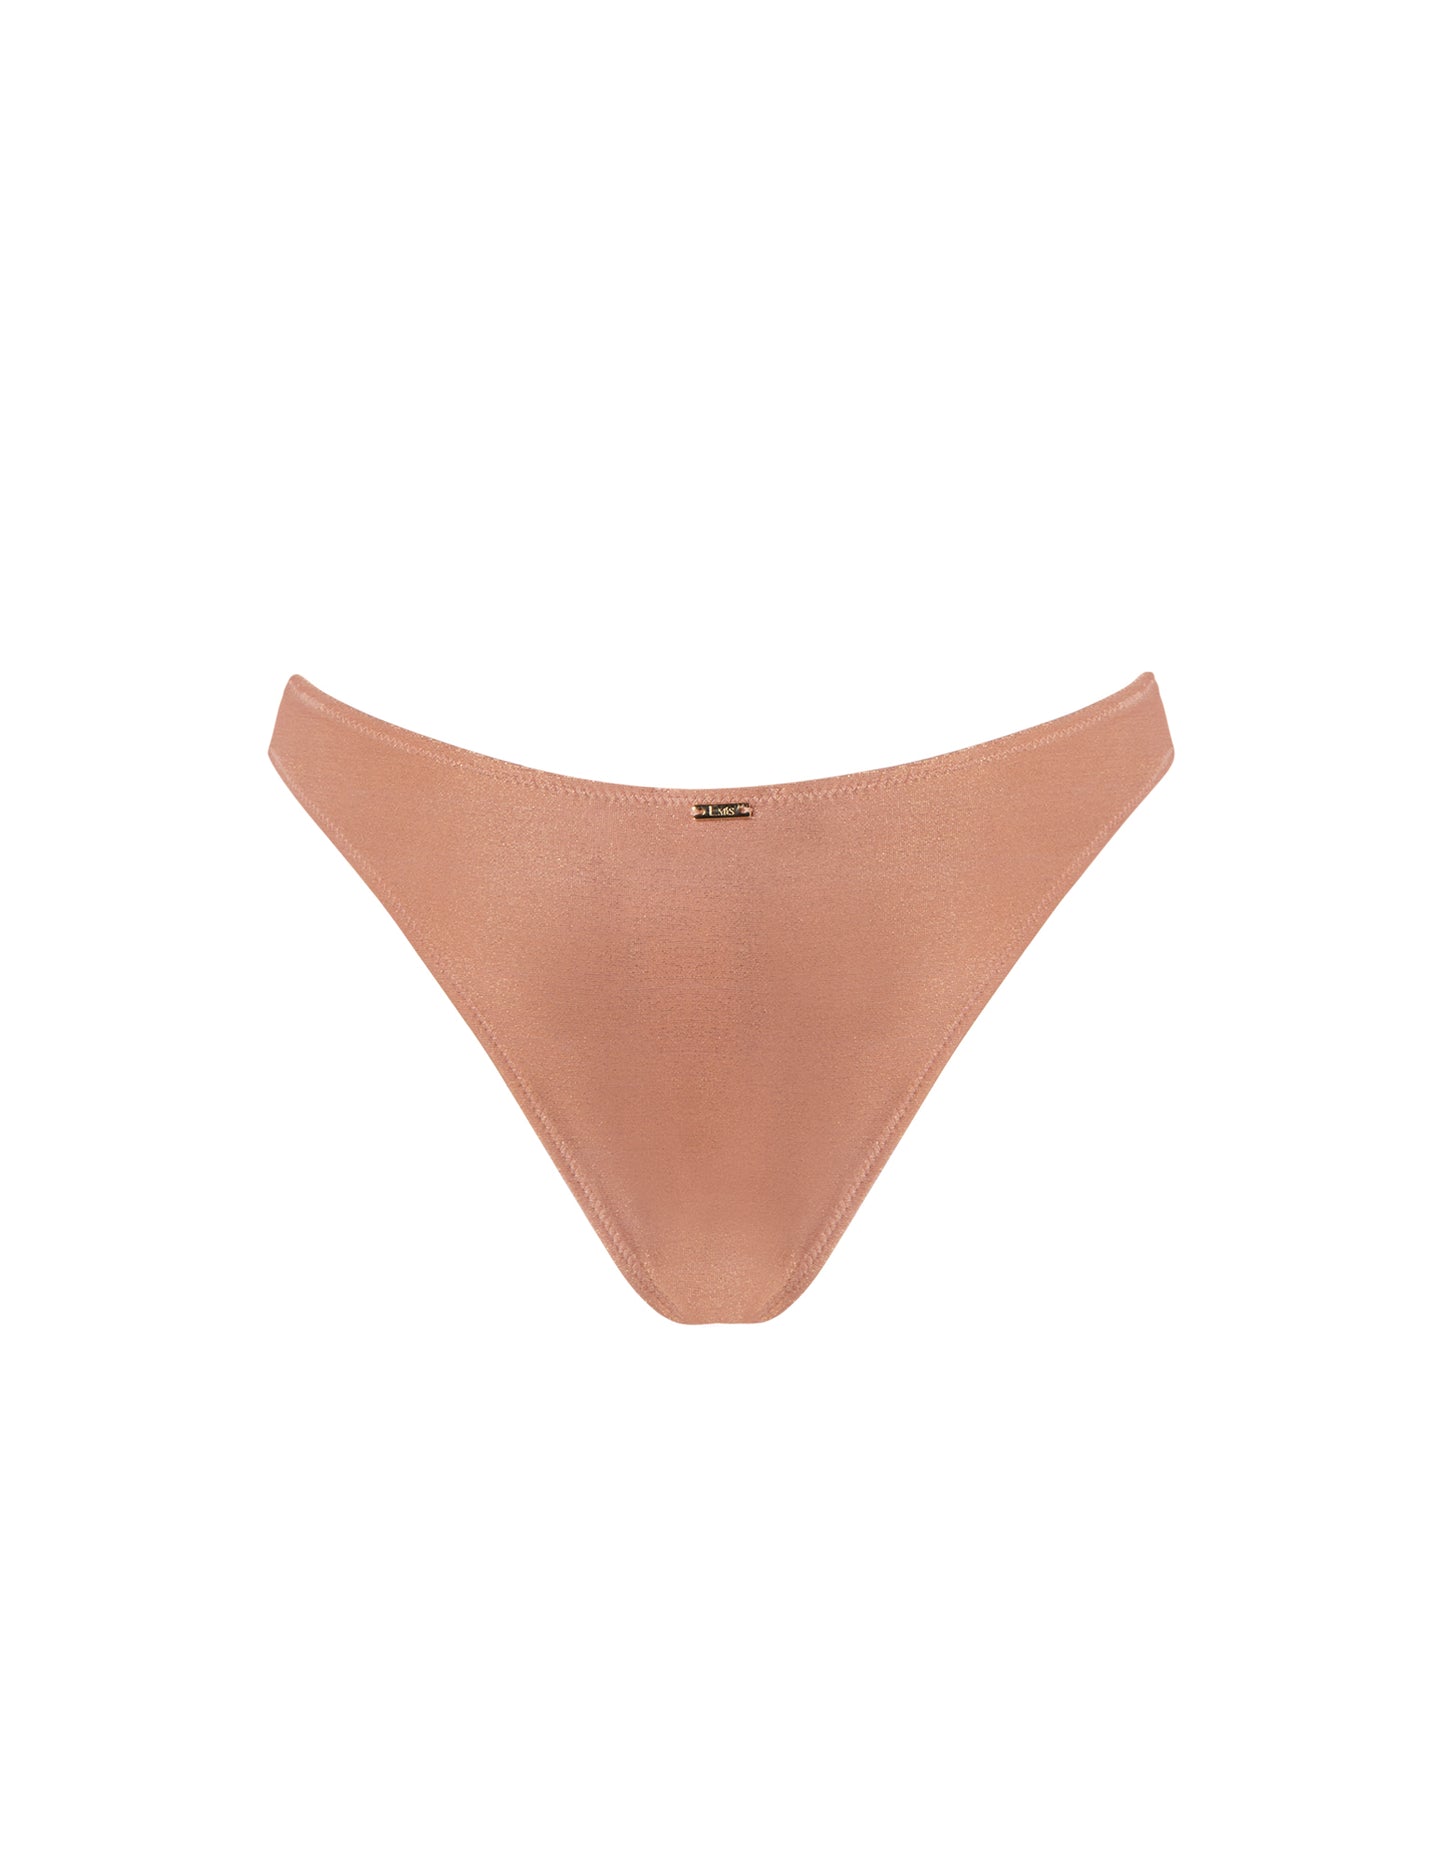 Swimsuit Pearl Gold Sand Bottom